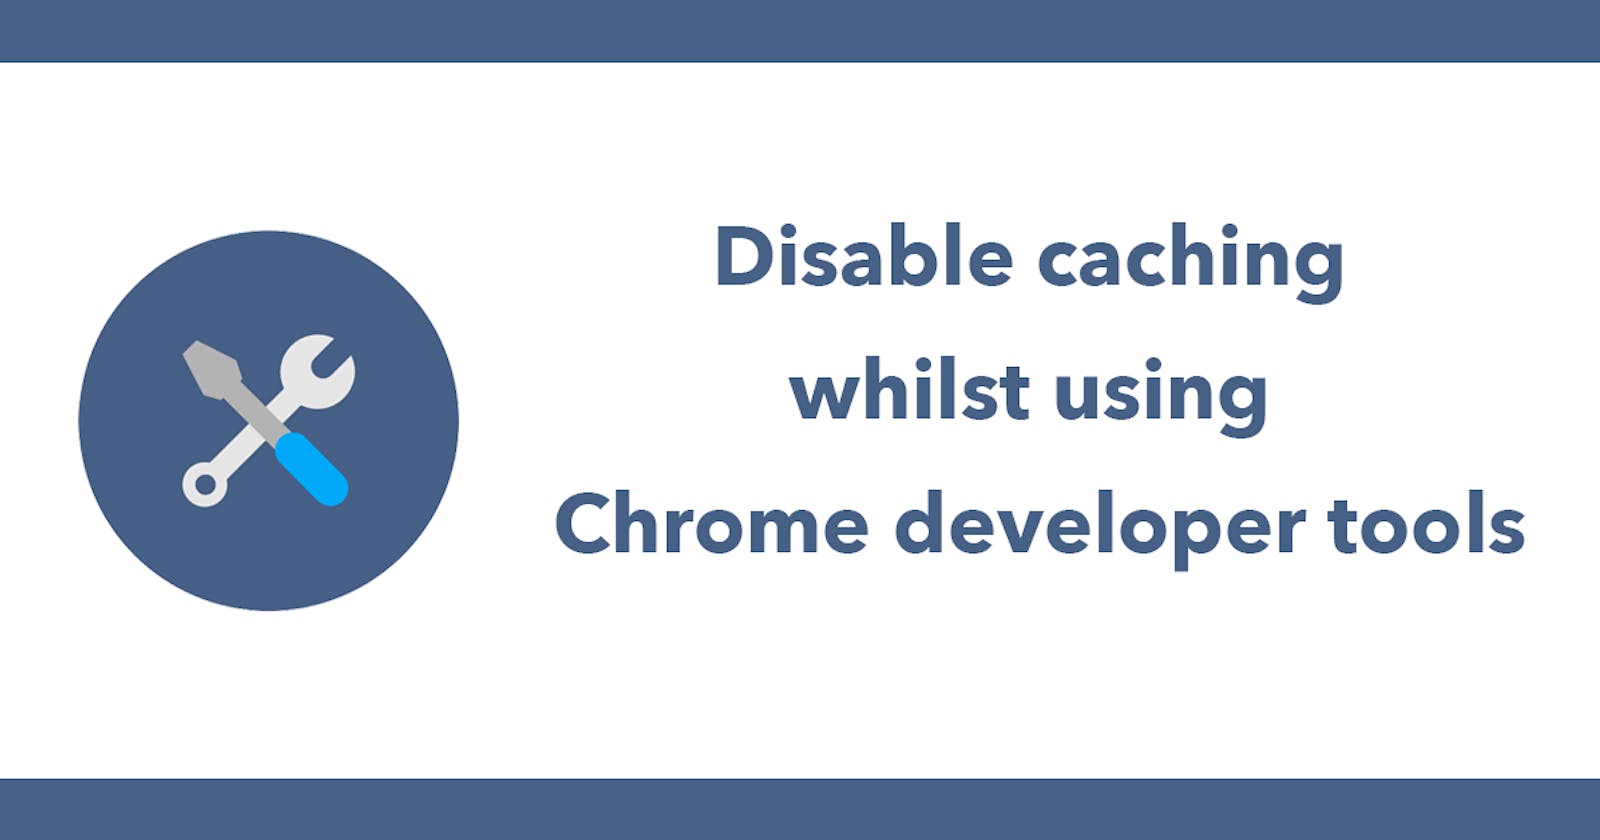 Disable caching whilst using Chrome developer tools